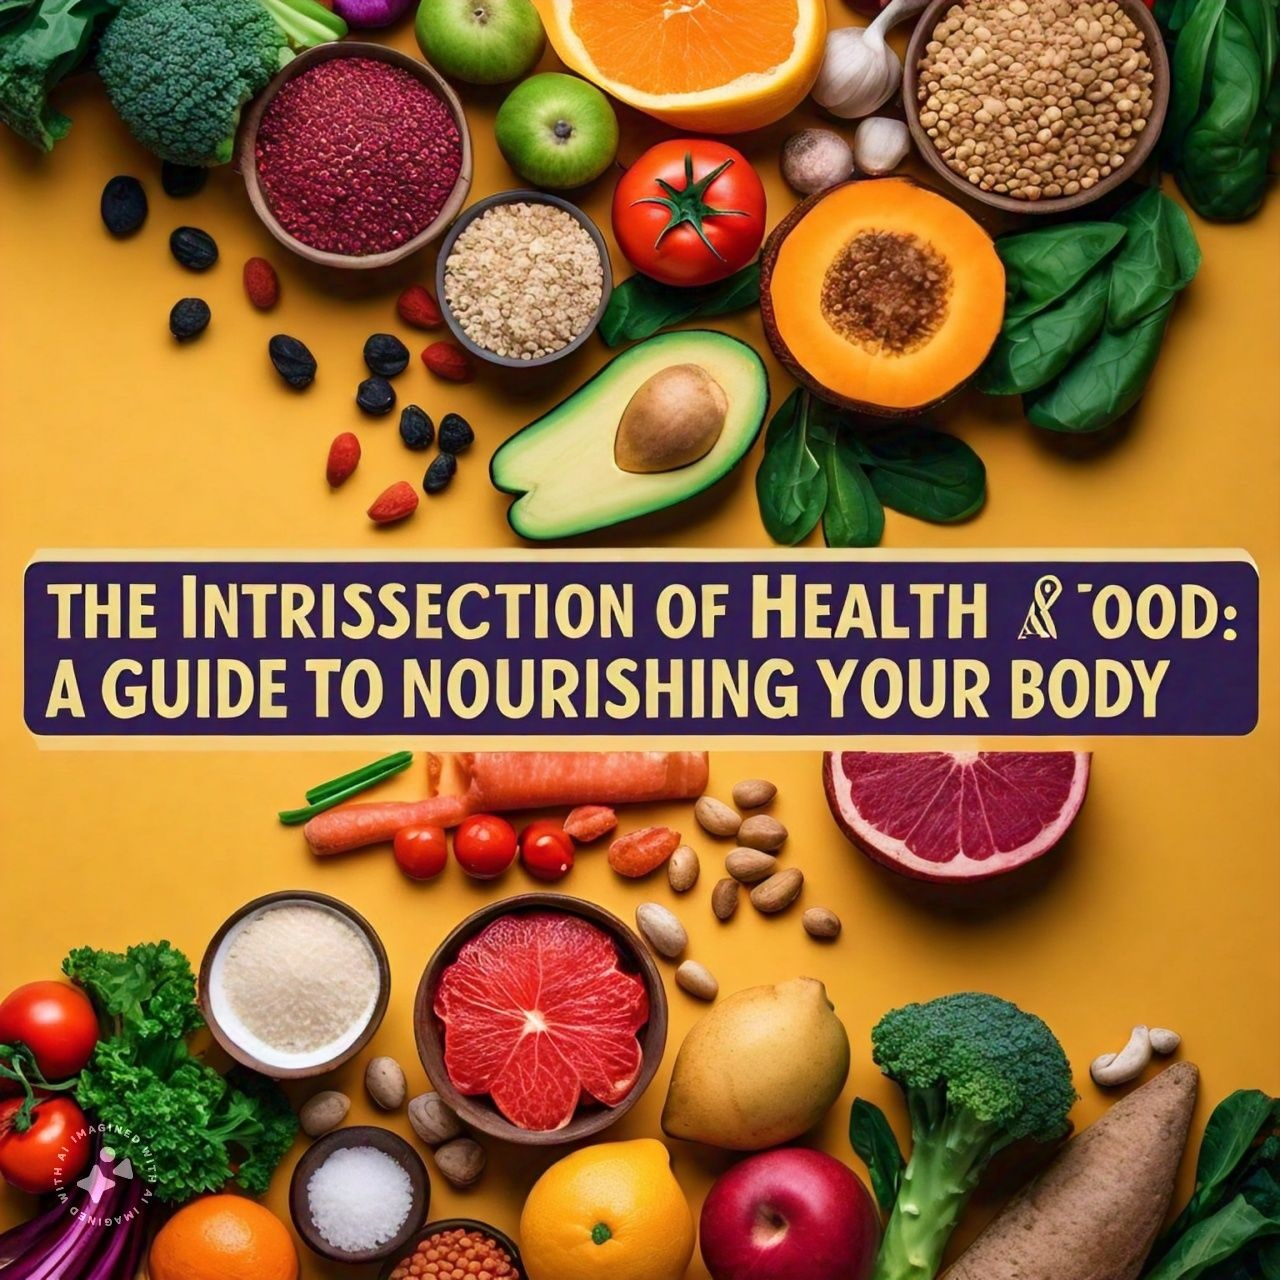 The Intersection of Health and Food: A Guide to Nourishing Your Body